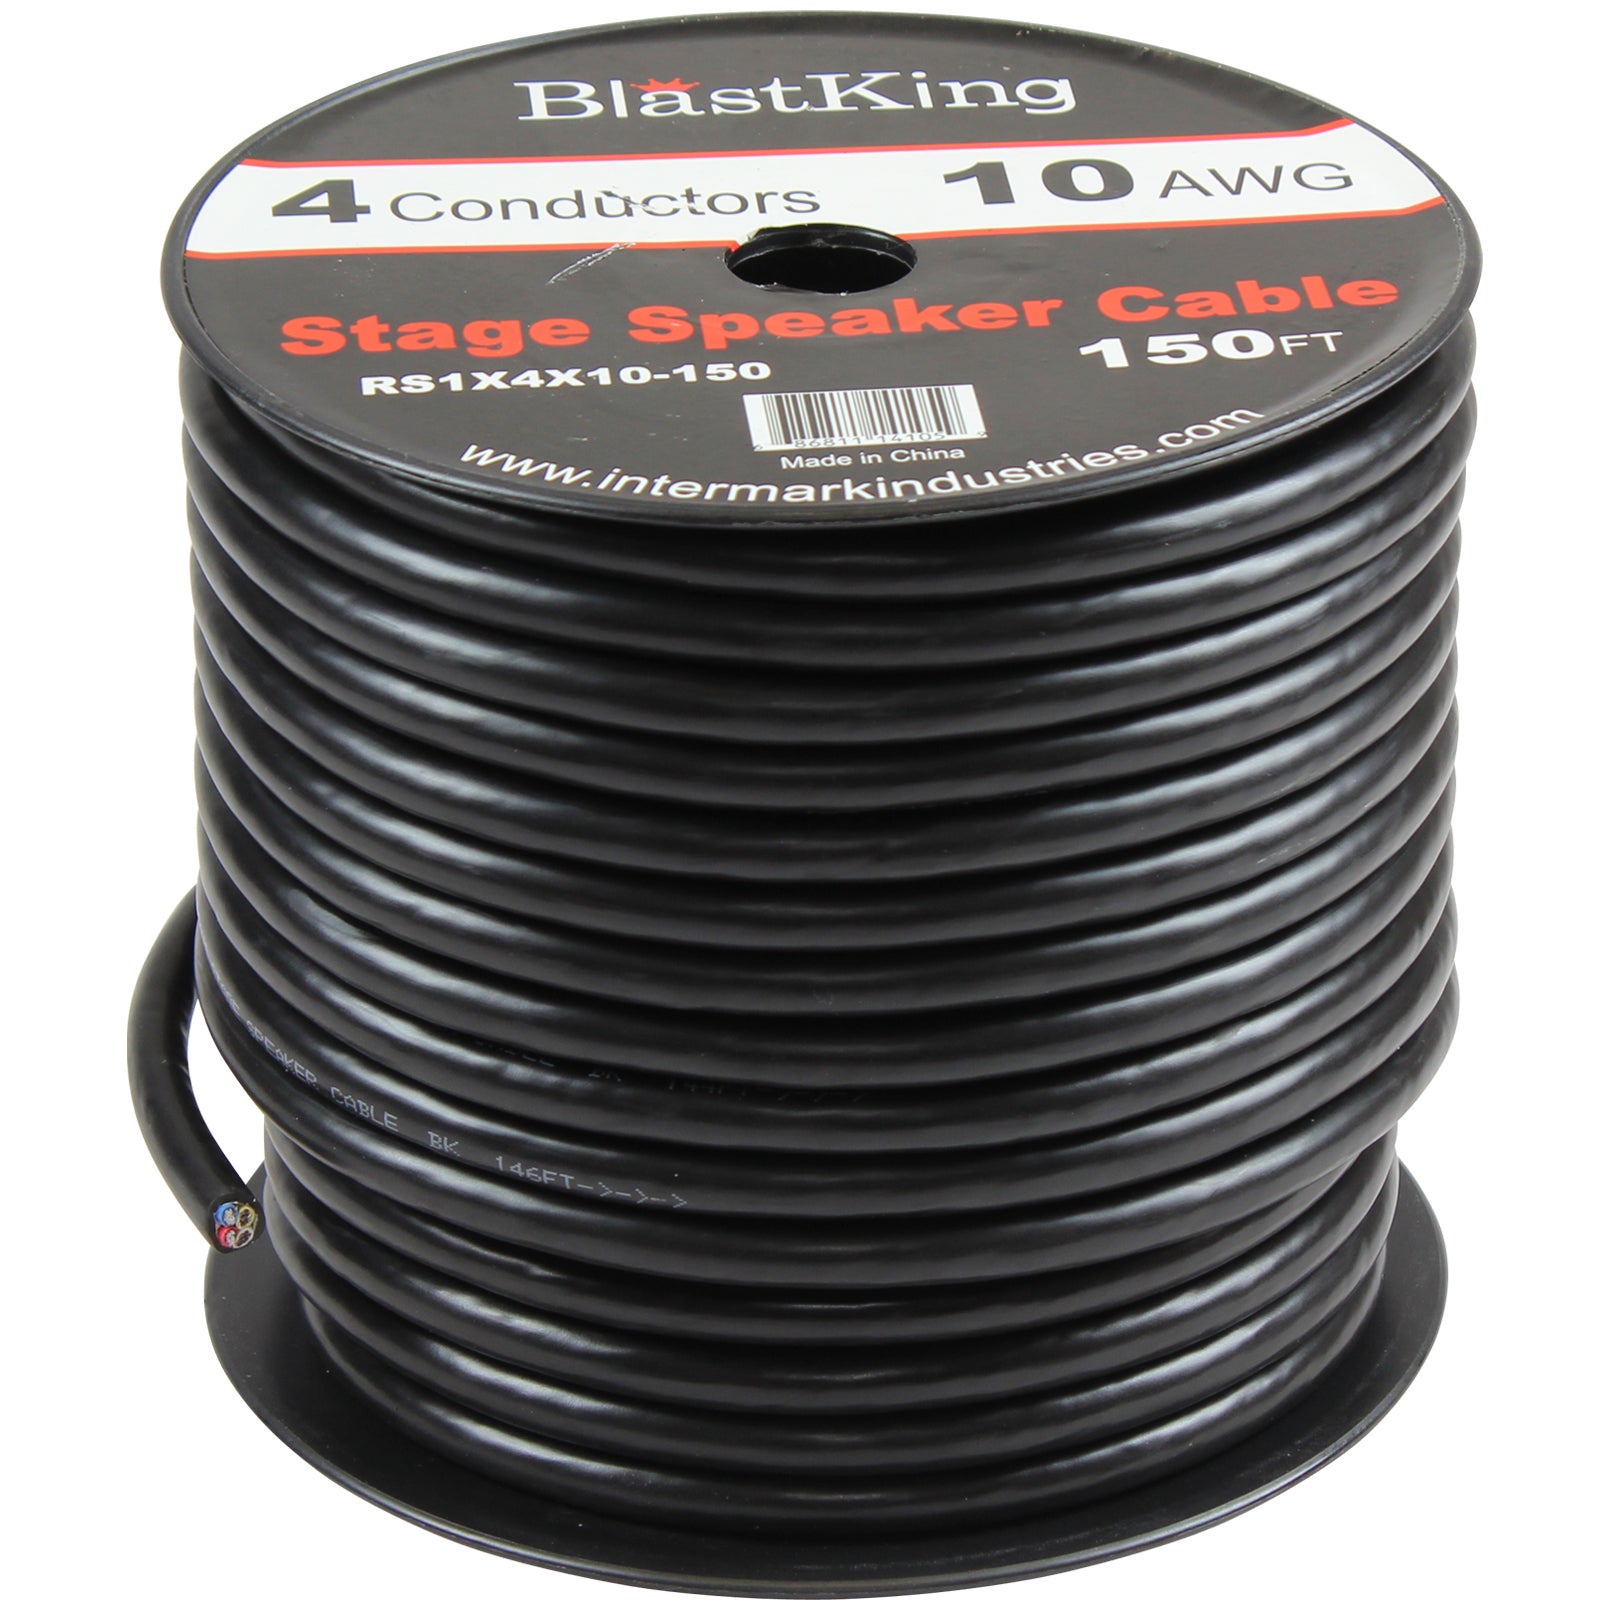 Blastking RS1X4X10-150 10 AWG 4-Conductor Speaker Cable 150 Ft